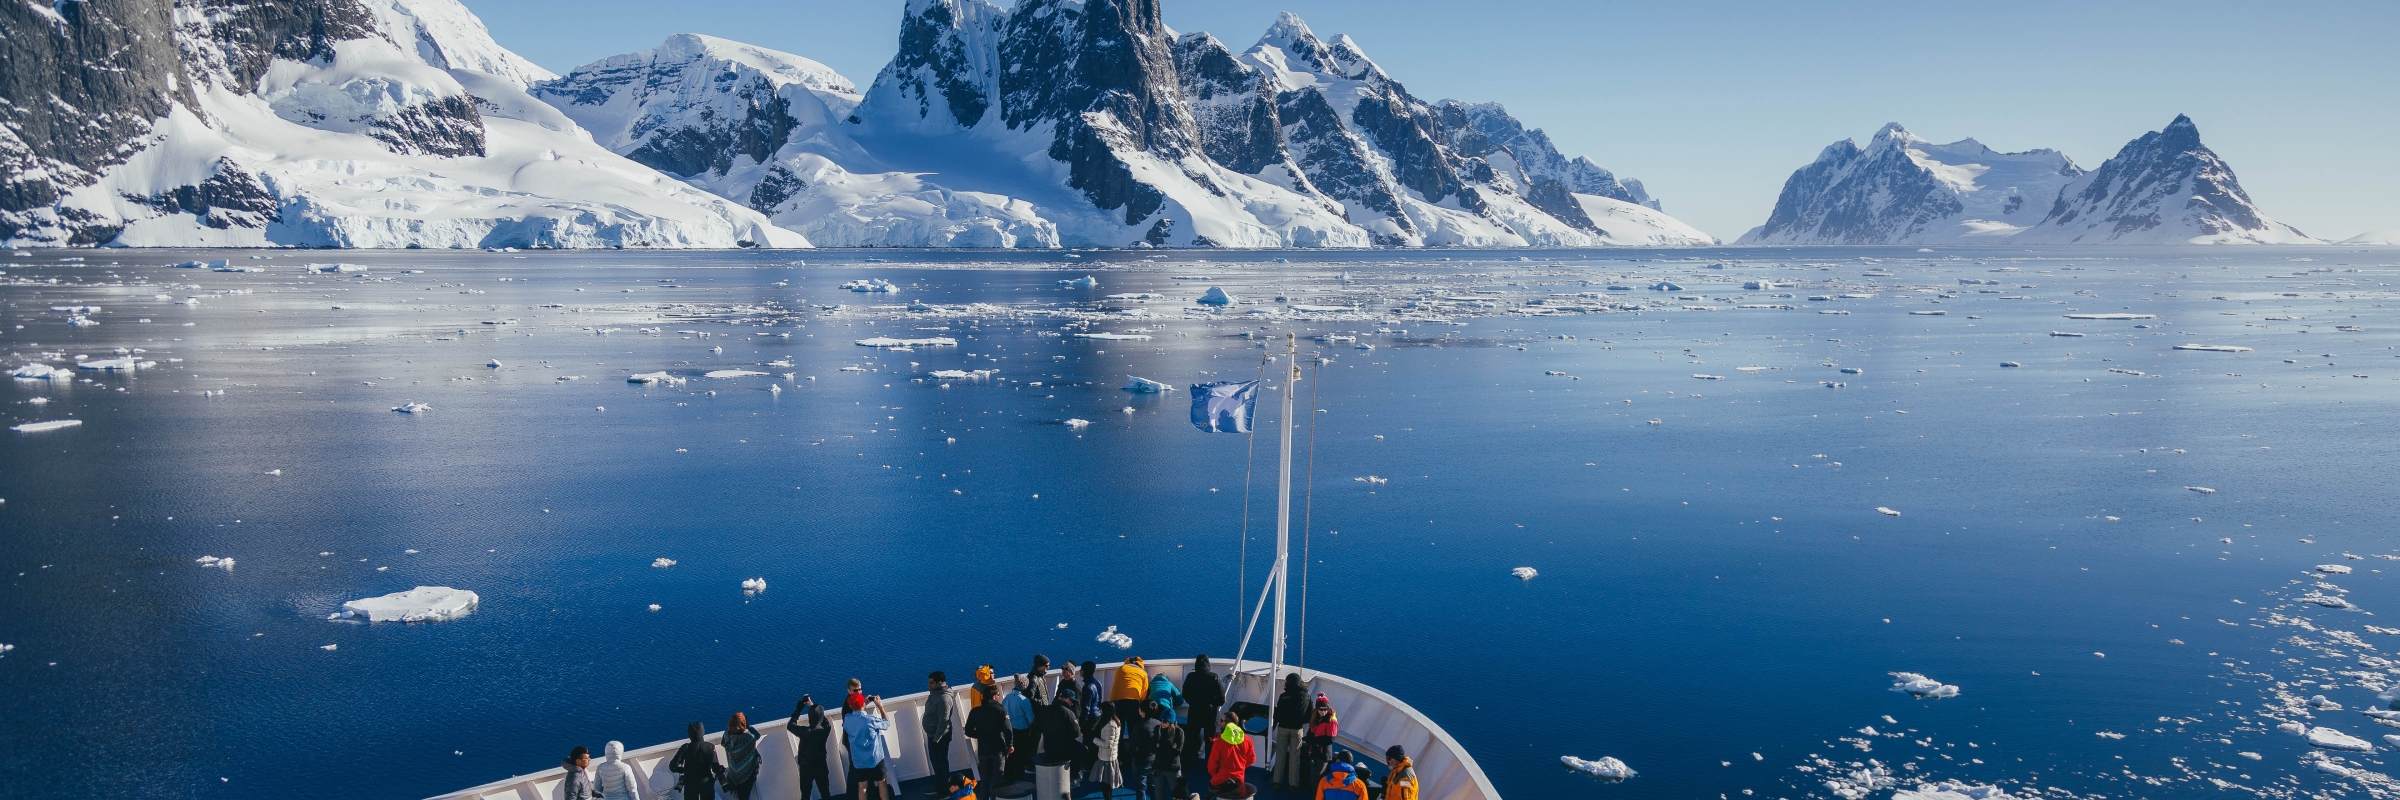 Explore the Antarctic aboard Quark Expeditions' fleet of expedition vessels, photo by David Merron. 